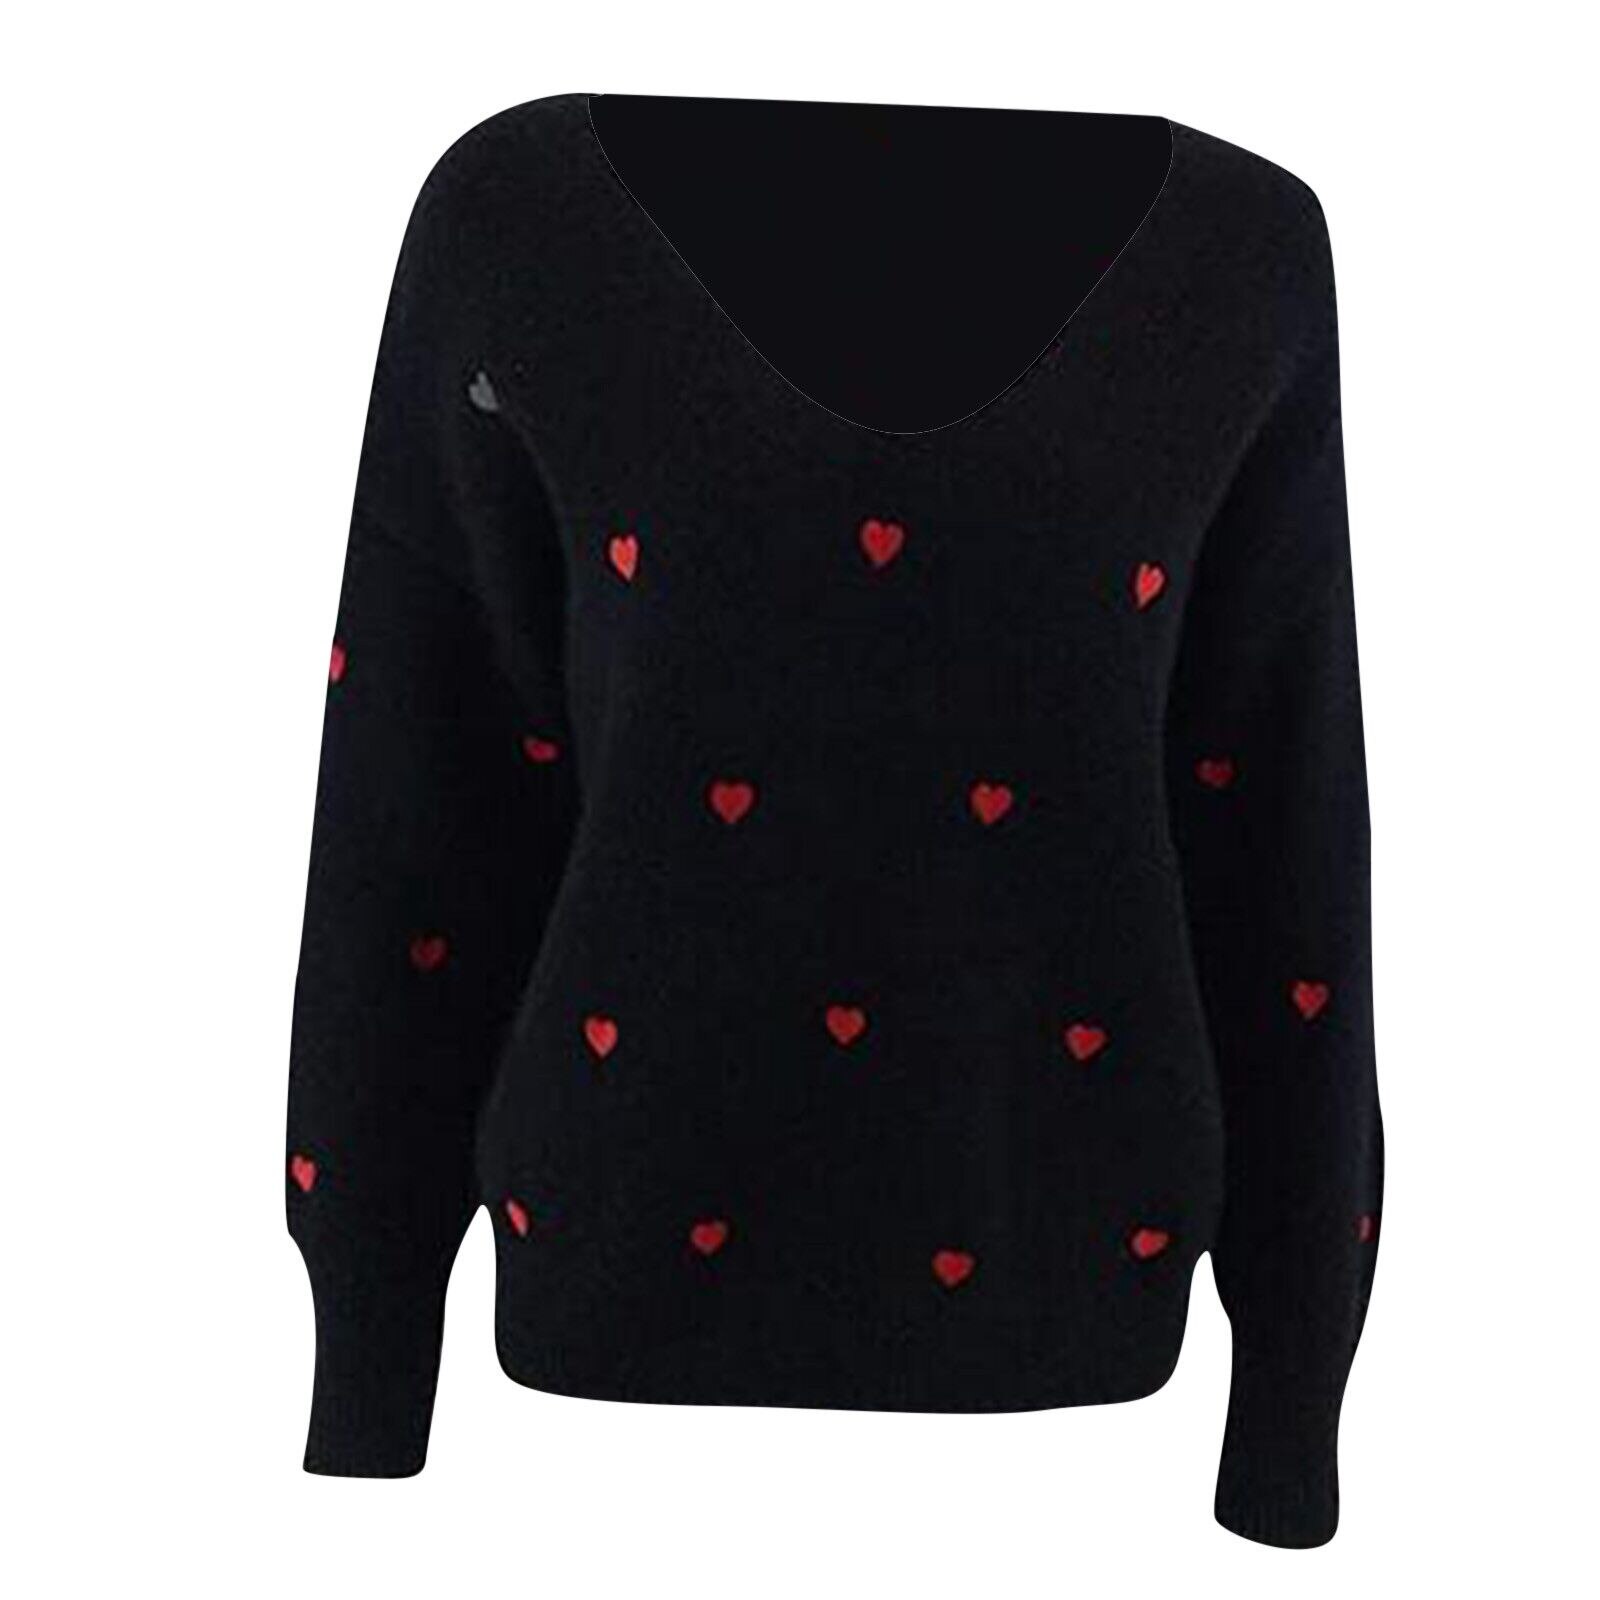 Women Love Heart Print Long Sleeve Knitwear O Neck Casual V-neck Tops Female Plus Size Loose Top Blusas Mujer 2021 Fashion